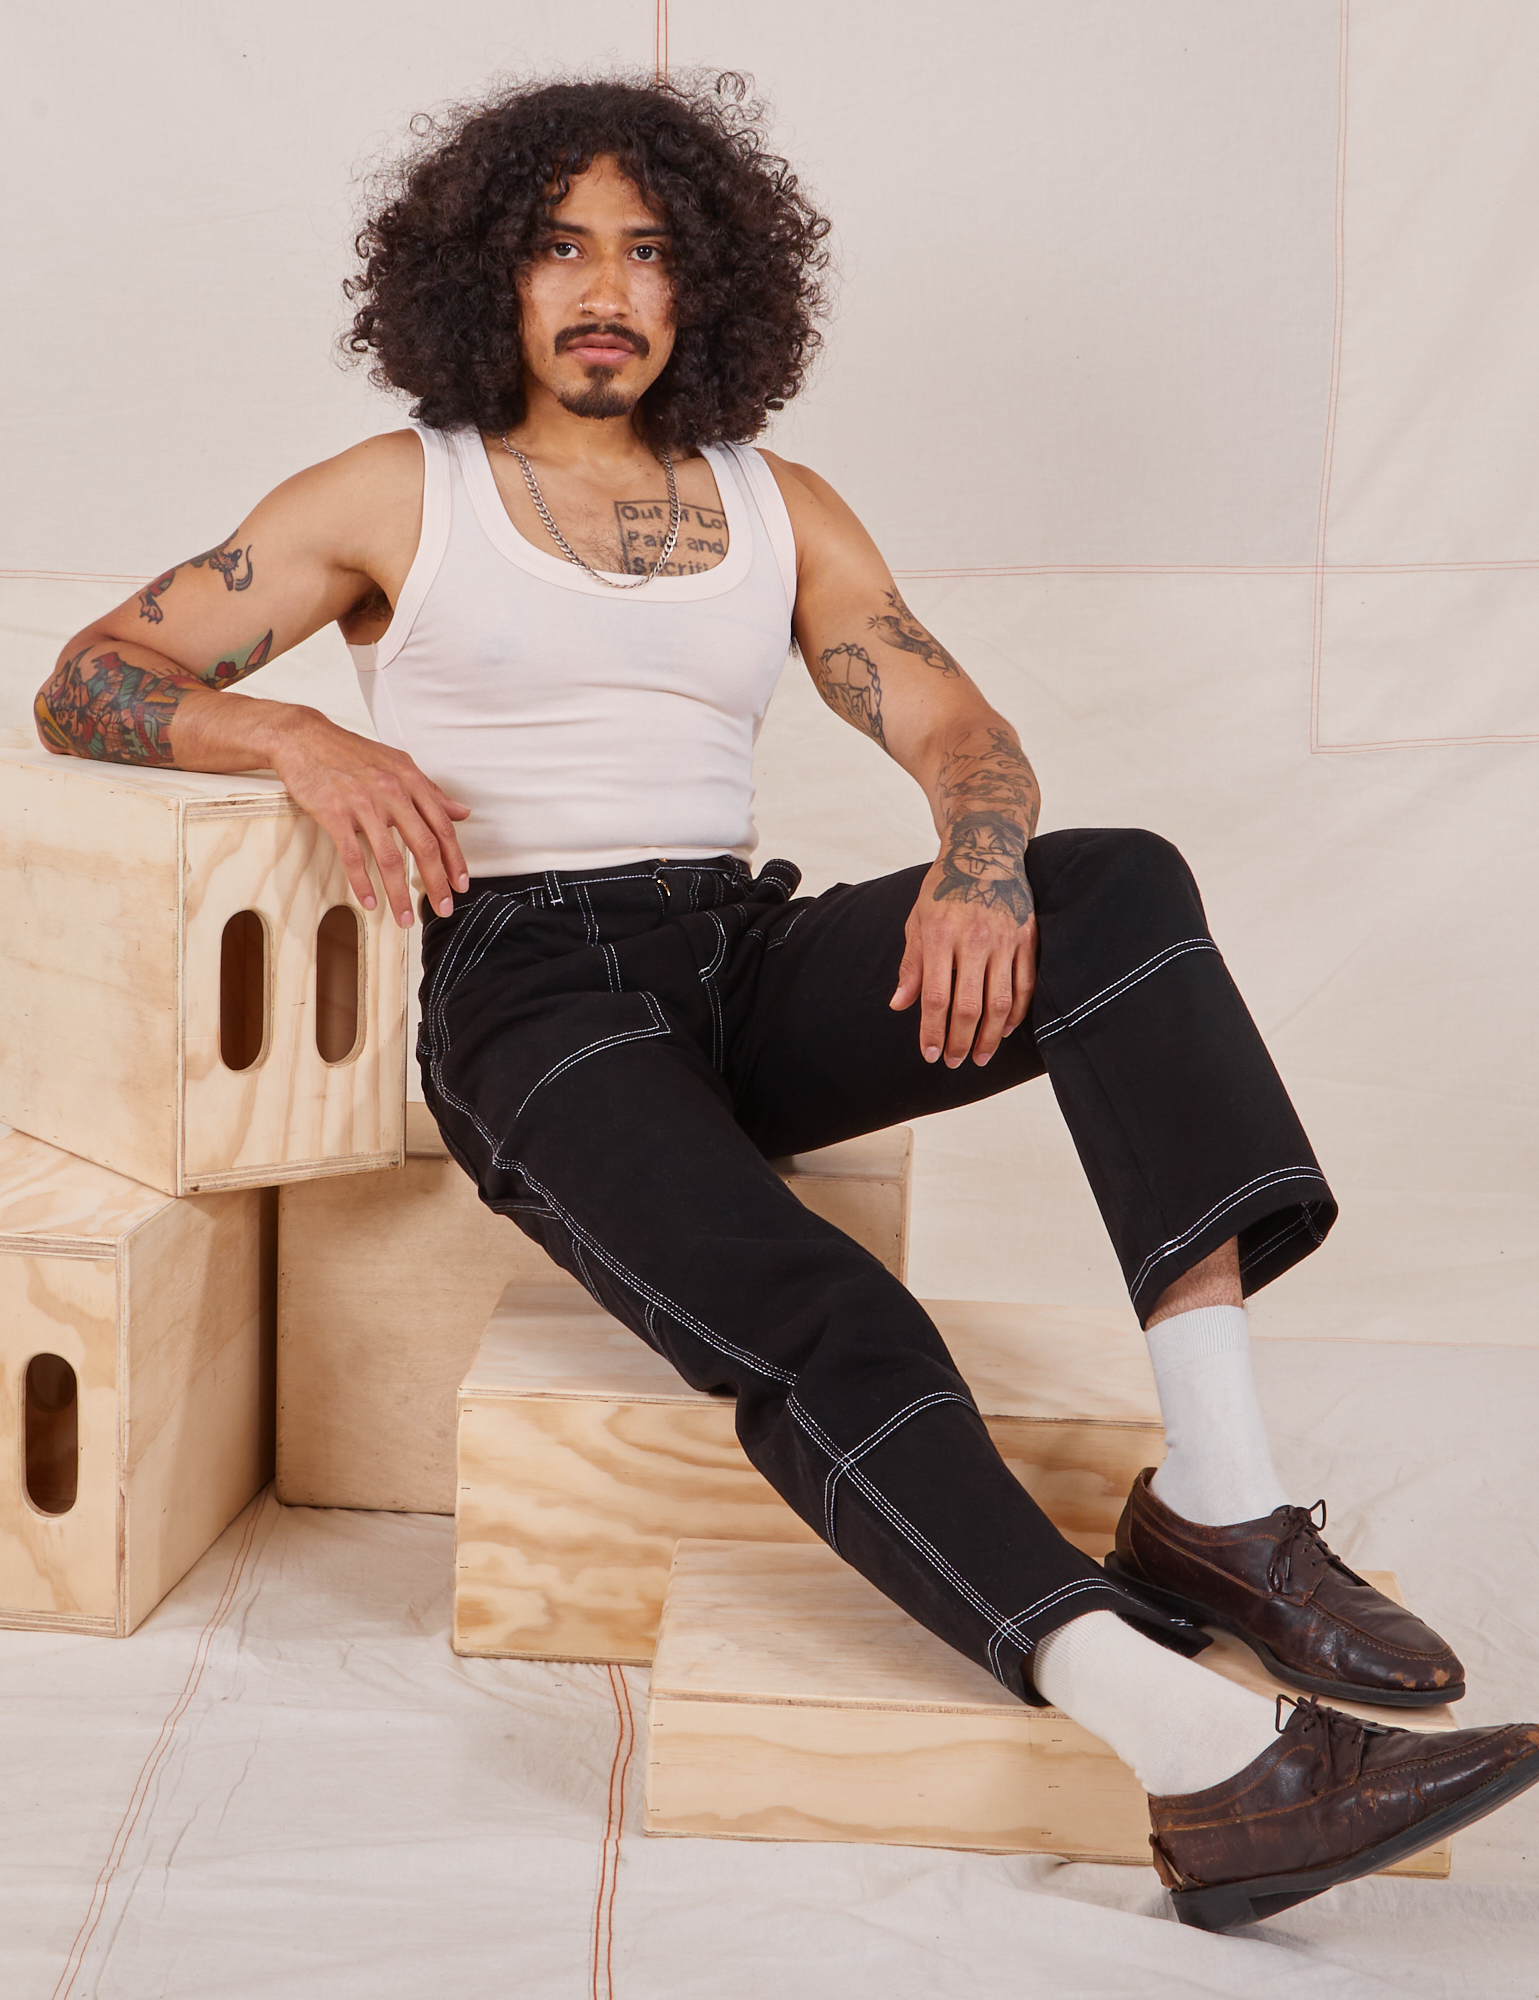 Jesse is sitting on a wooden crate. They are wearing Carpenter Jeans in Black and Tank Top in vintage tee off-white